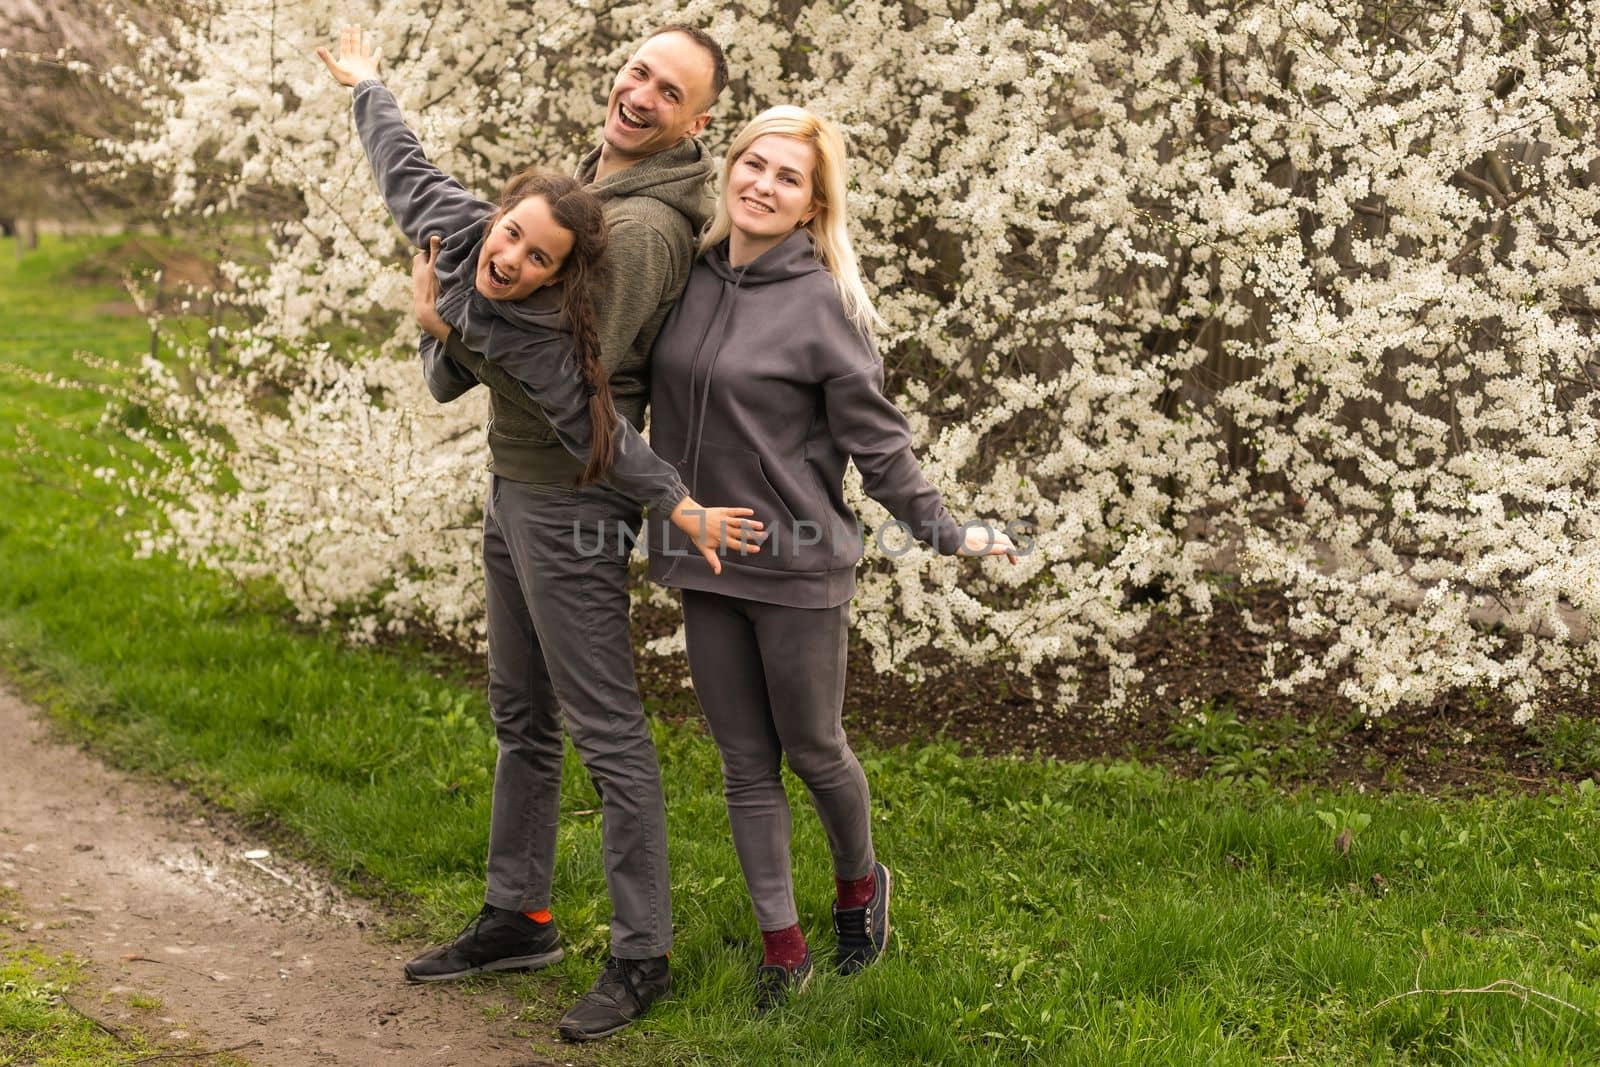 family in blooming garden with trees